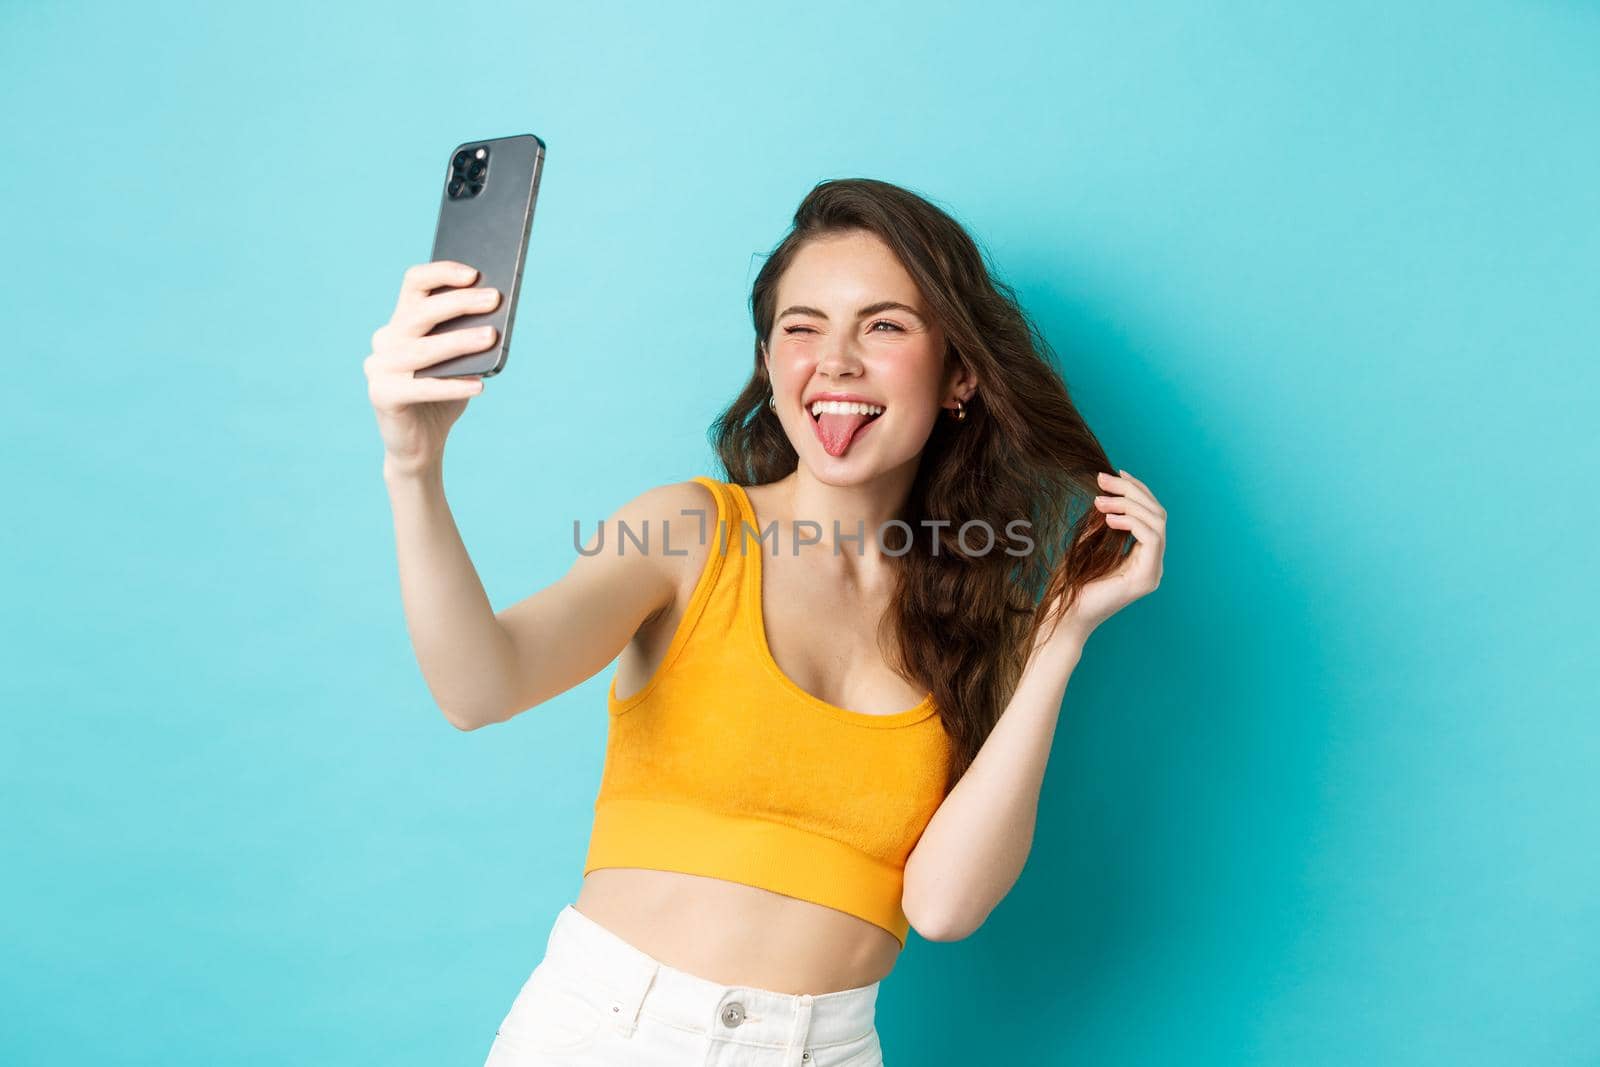 Technology and lifestyle concept. Happy young woman making silly faces while taking selfie on smartphone app with filters, standing against blue background.